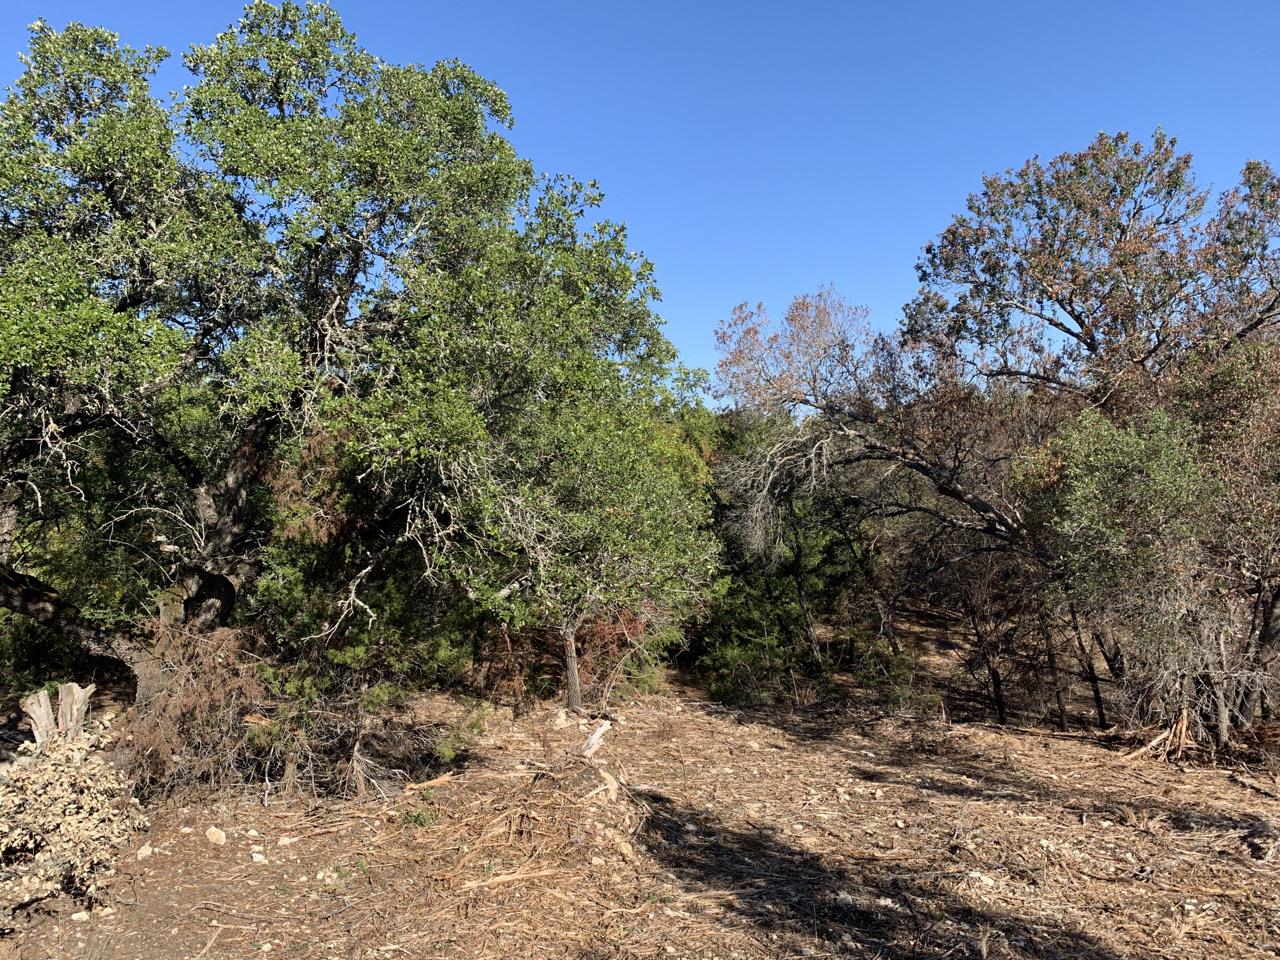 Dense woody vegetation in close proximity to multiple structures near a community in Bell County, Texas.